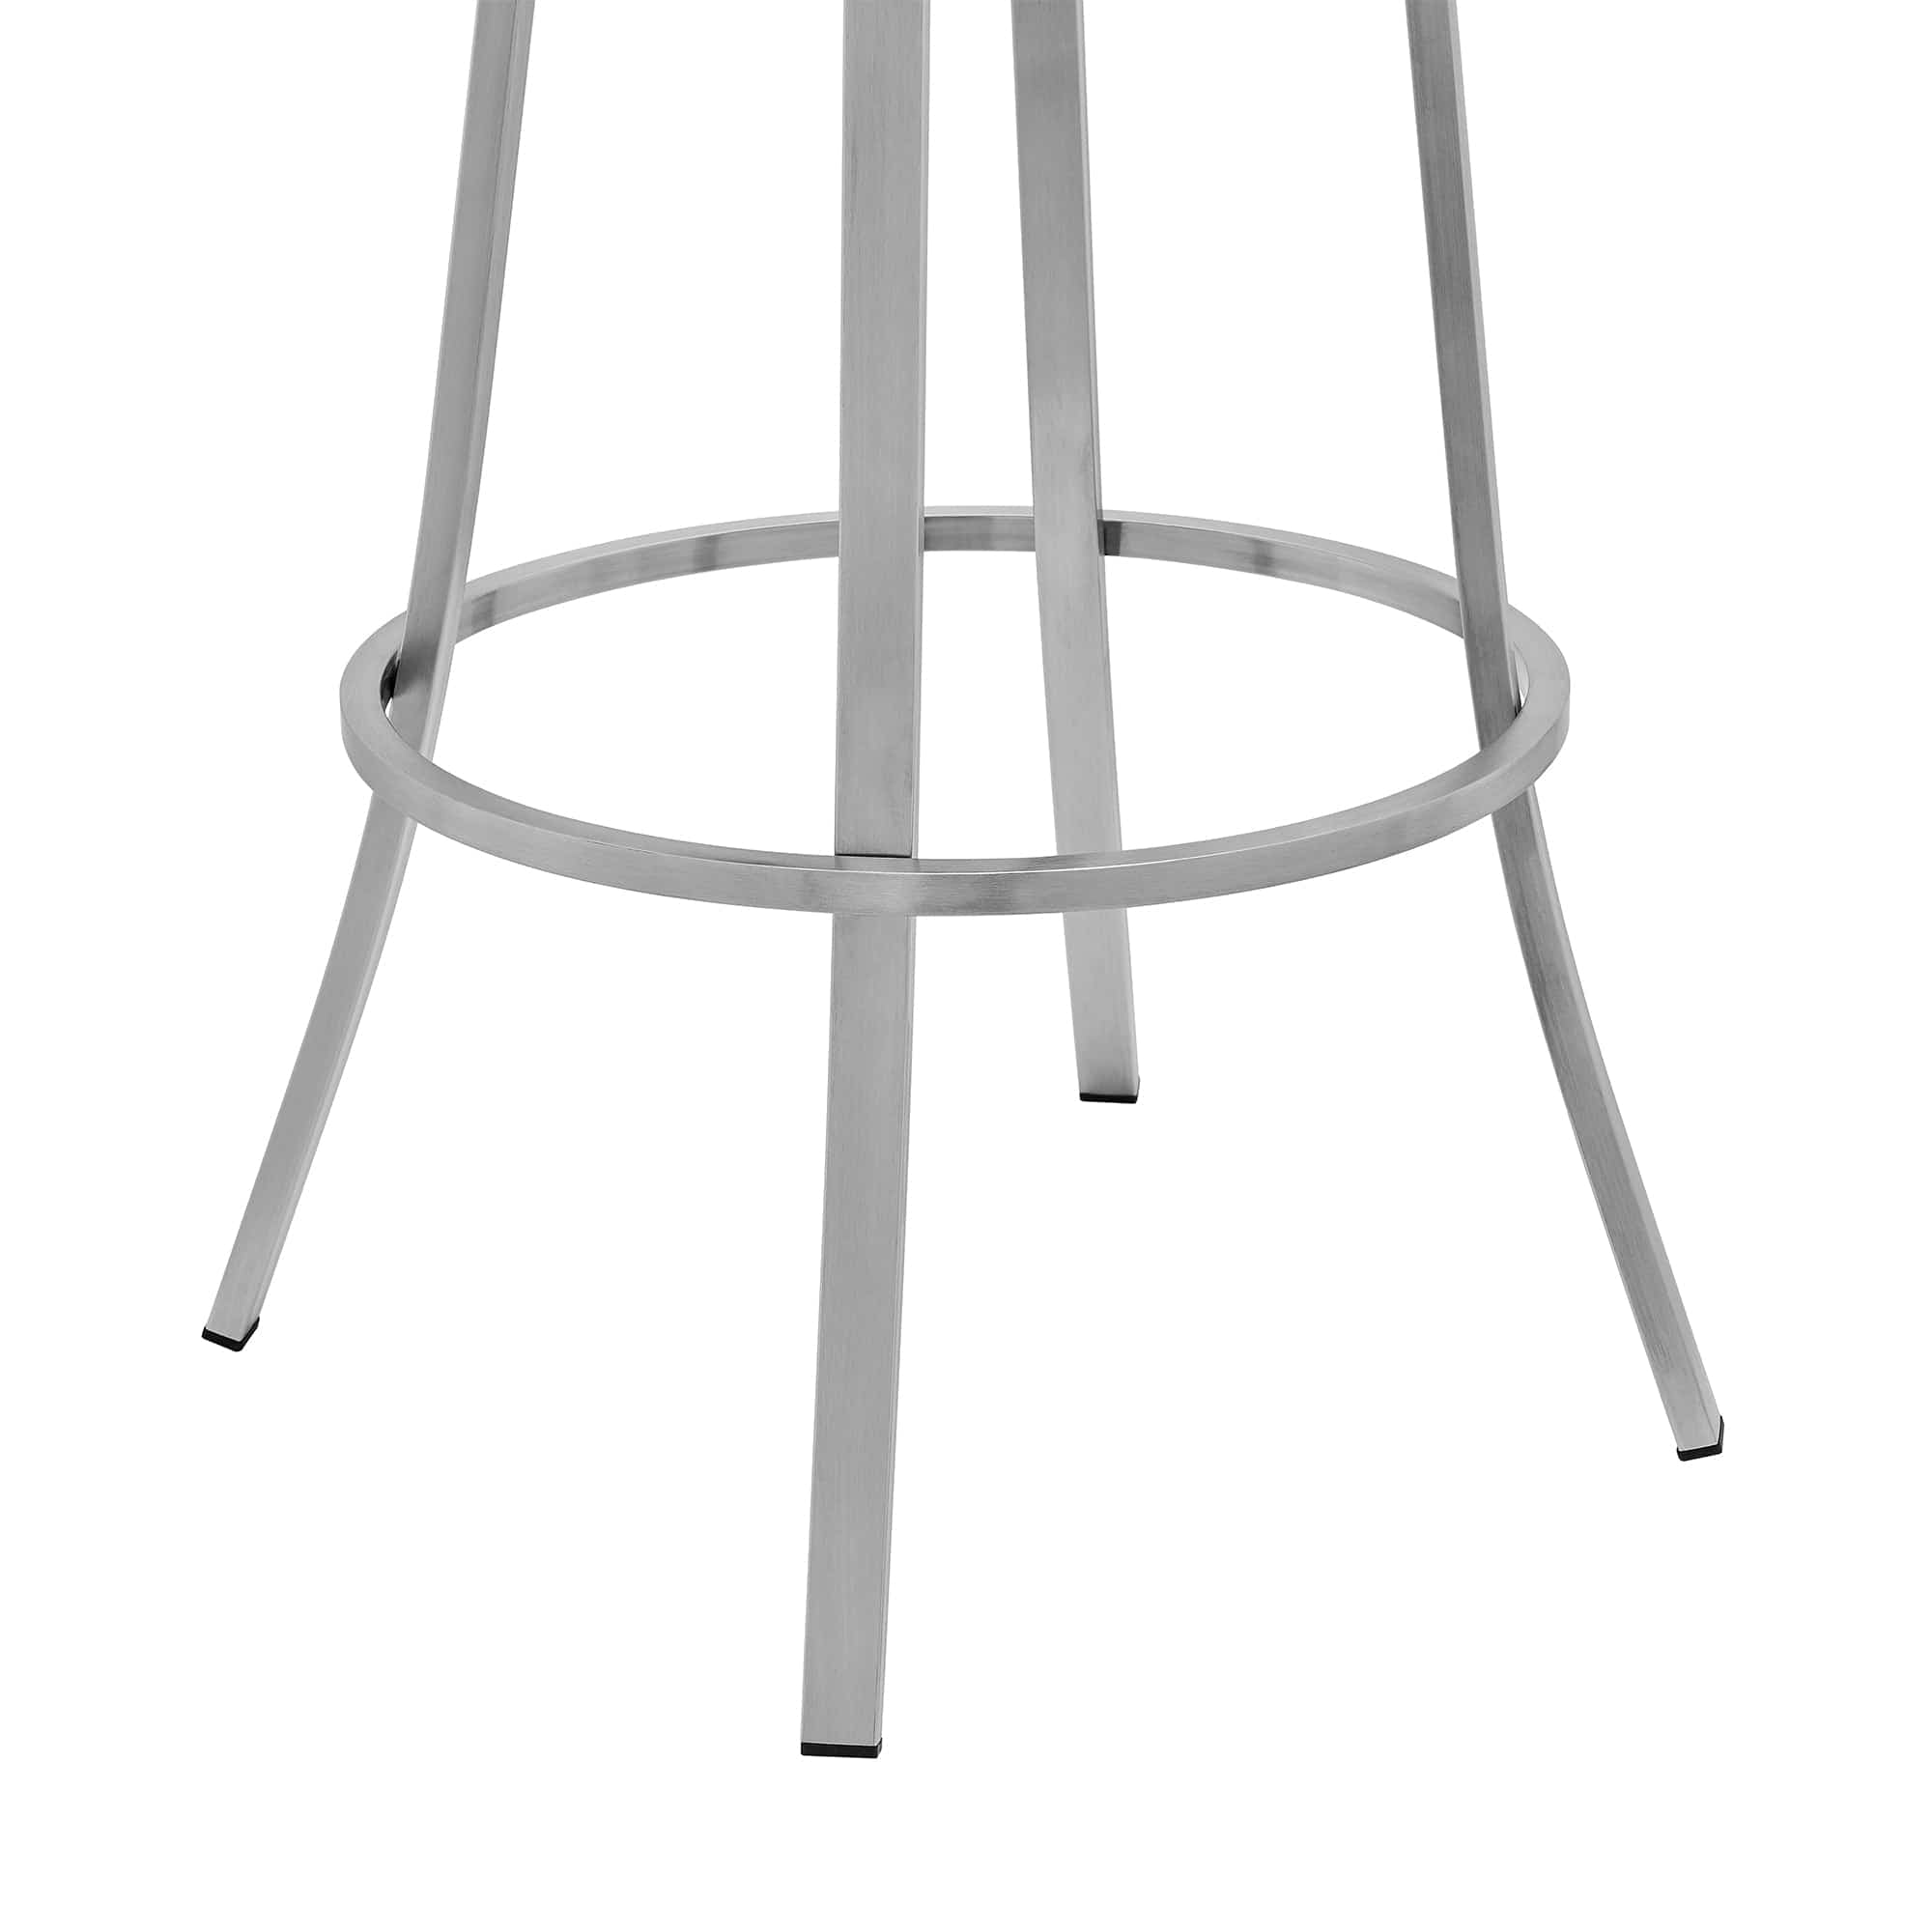 Armen Living Barstool Armen Living | Palmdale Swivel Modern Faux Leather Bar and Counter Stool in Brushed Stainless Steel Finish | 721535752201